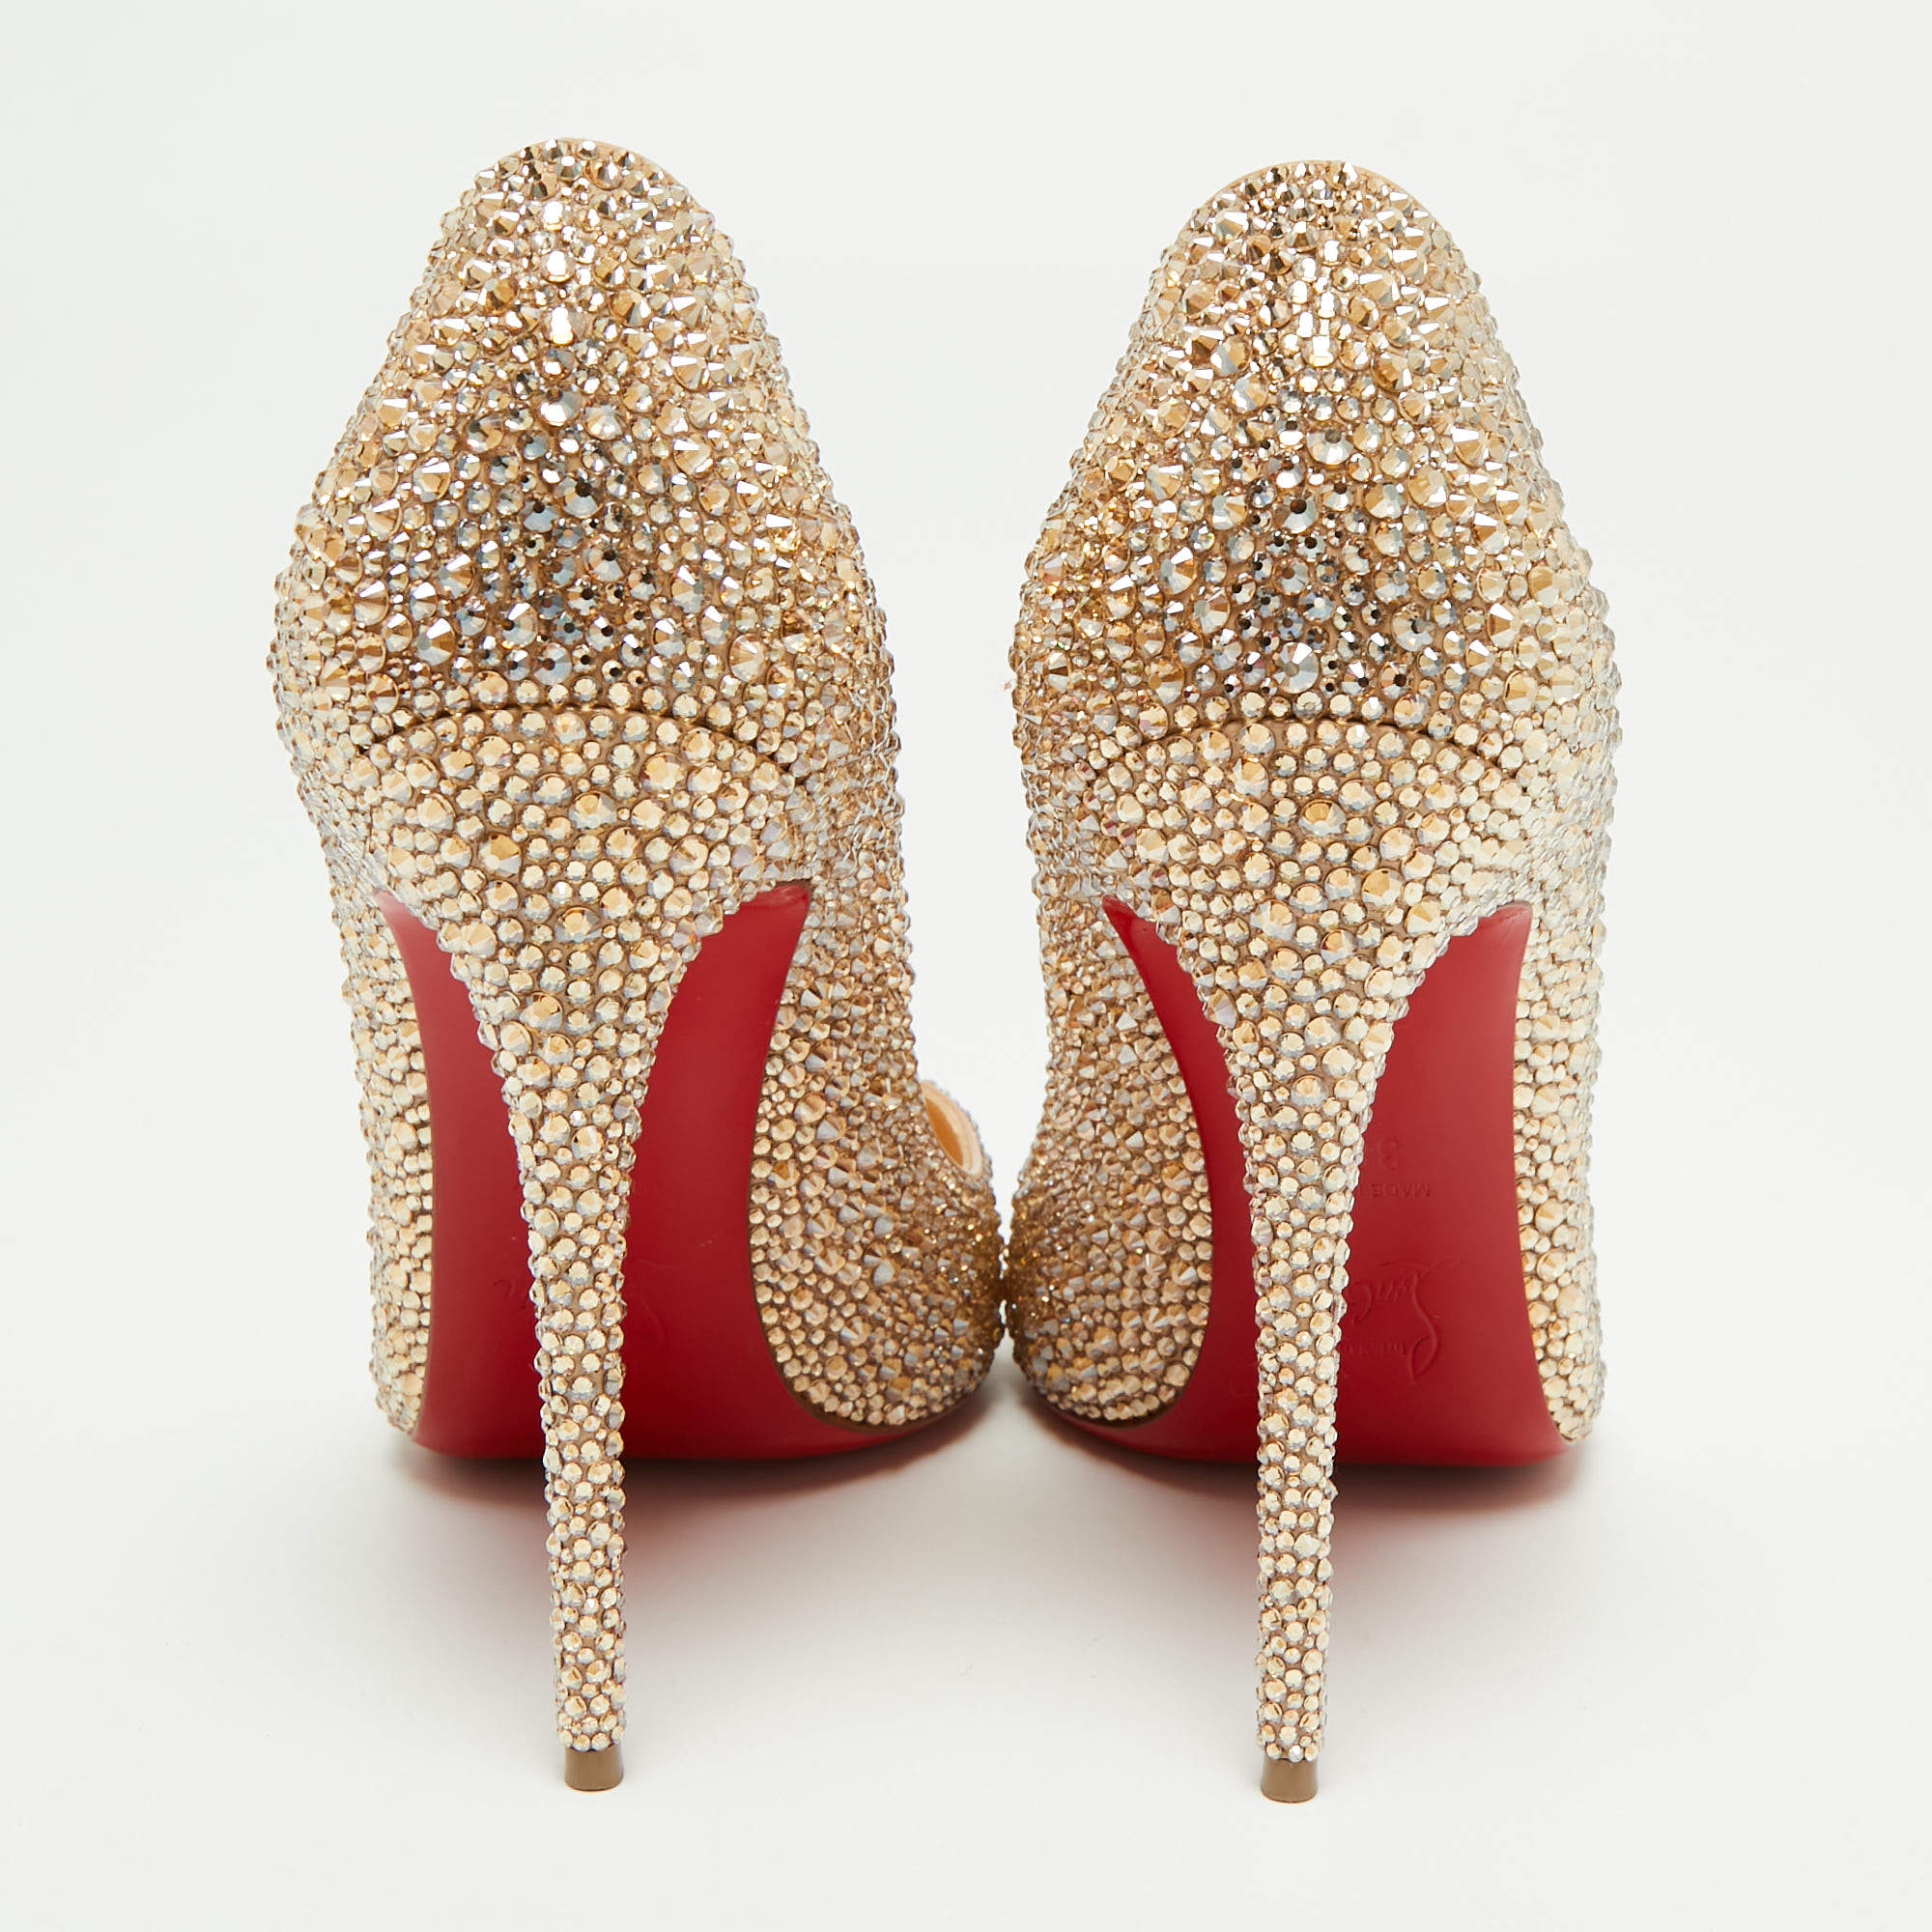 Christian Louboutin Pigalle Follies Strass 120 mm – Shoes Post